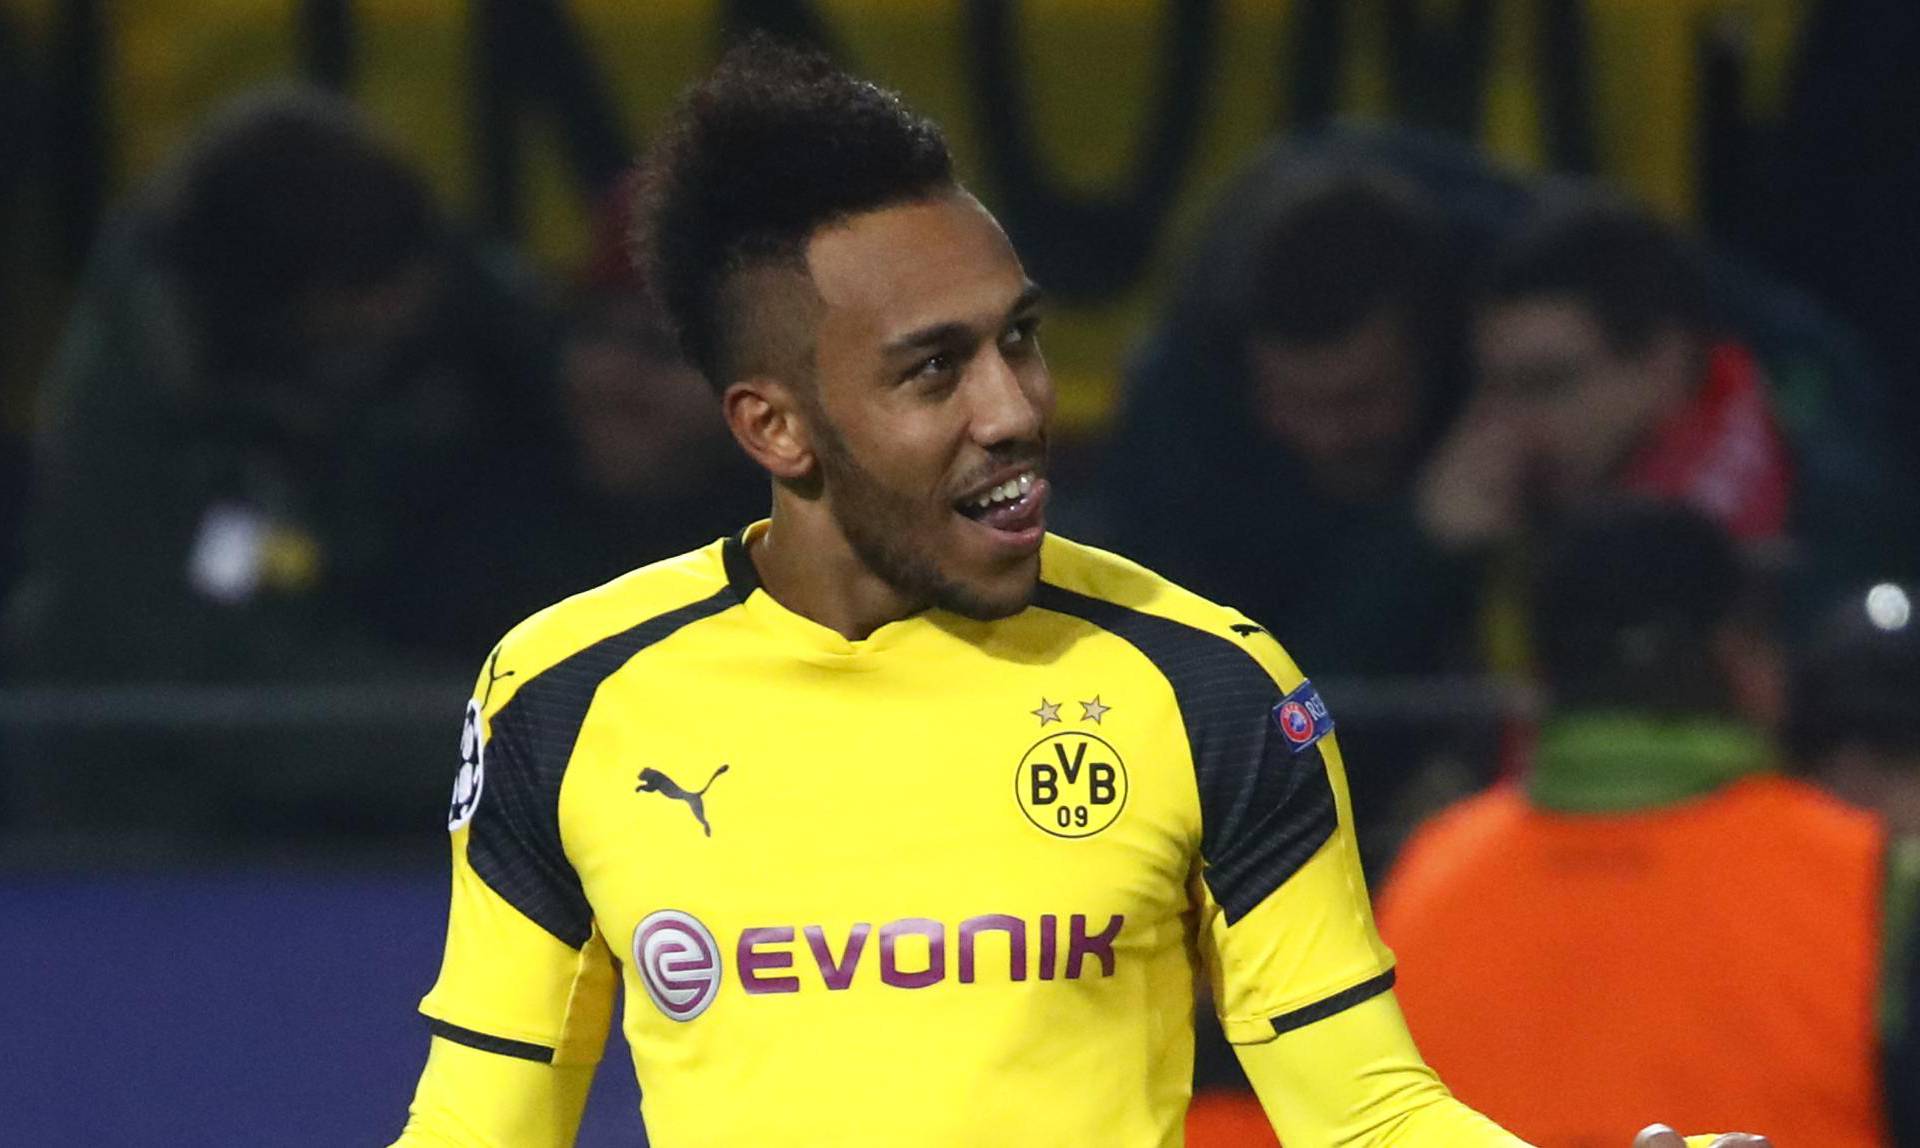 Borussia Dortmund's Pierre-Emerick Aubameyang celebrates scoring their fourth goal and completing his hat trick